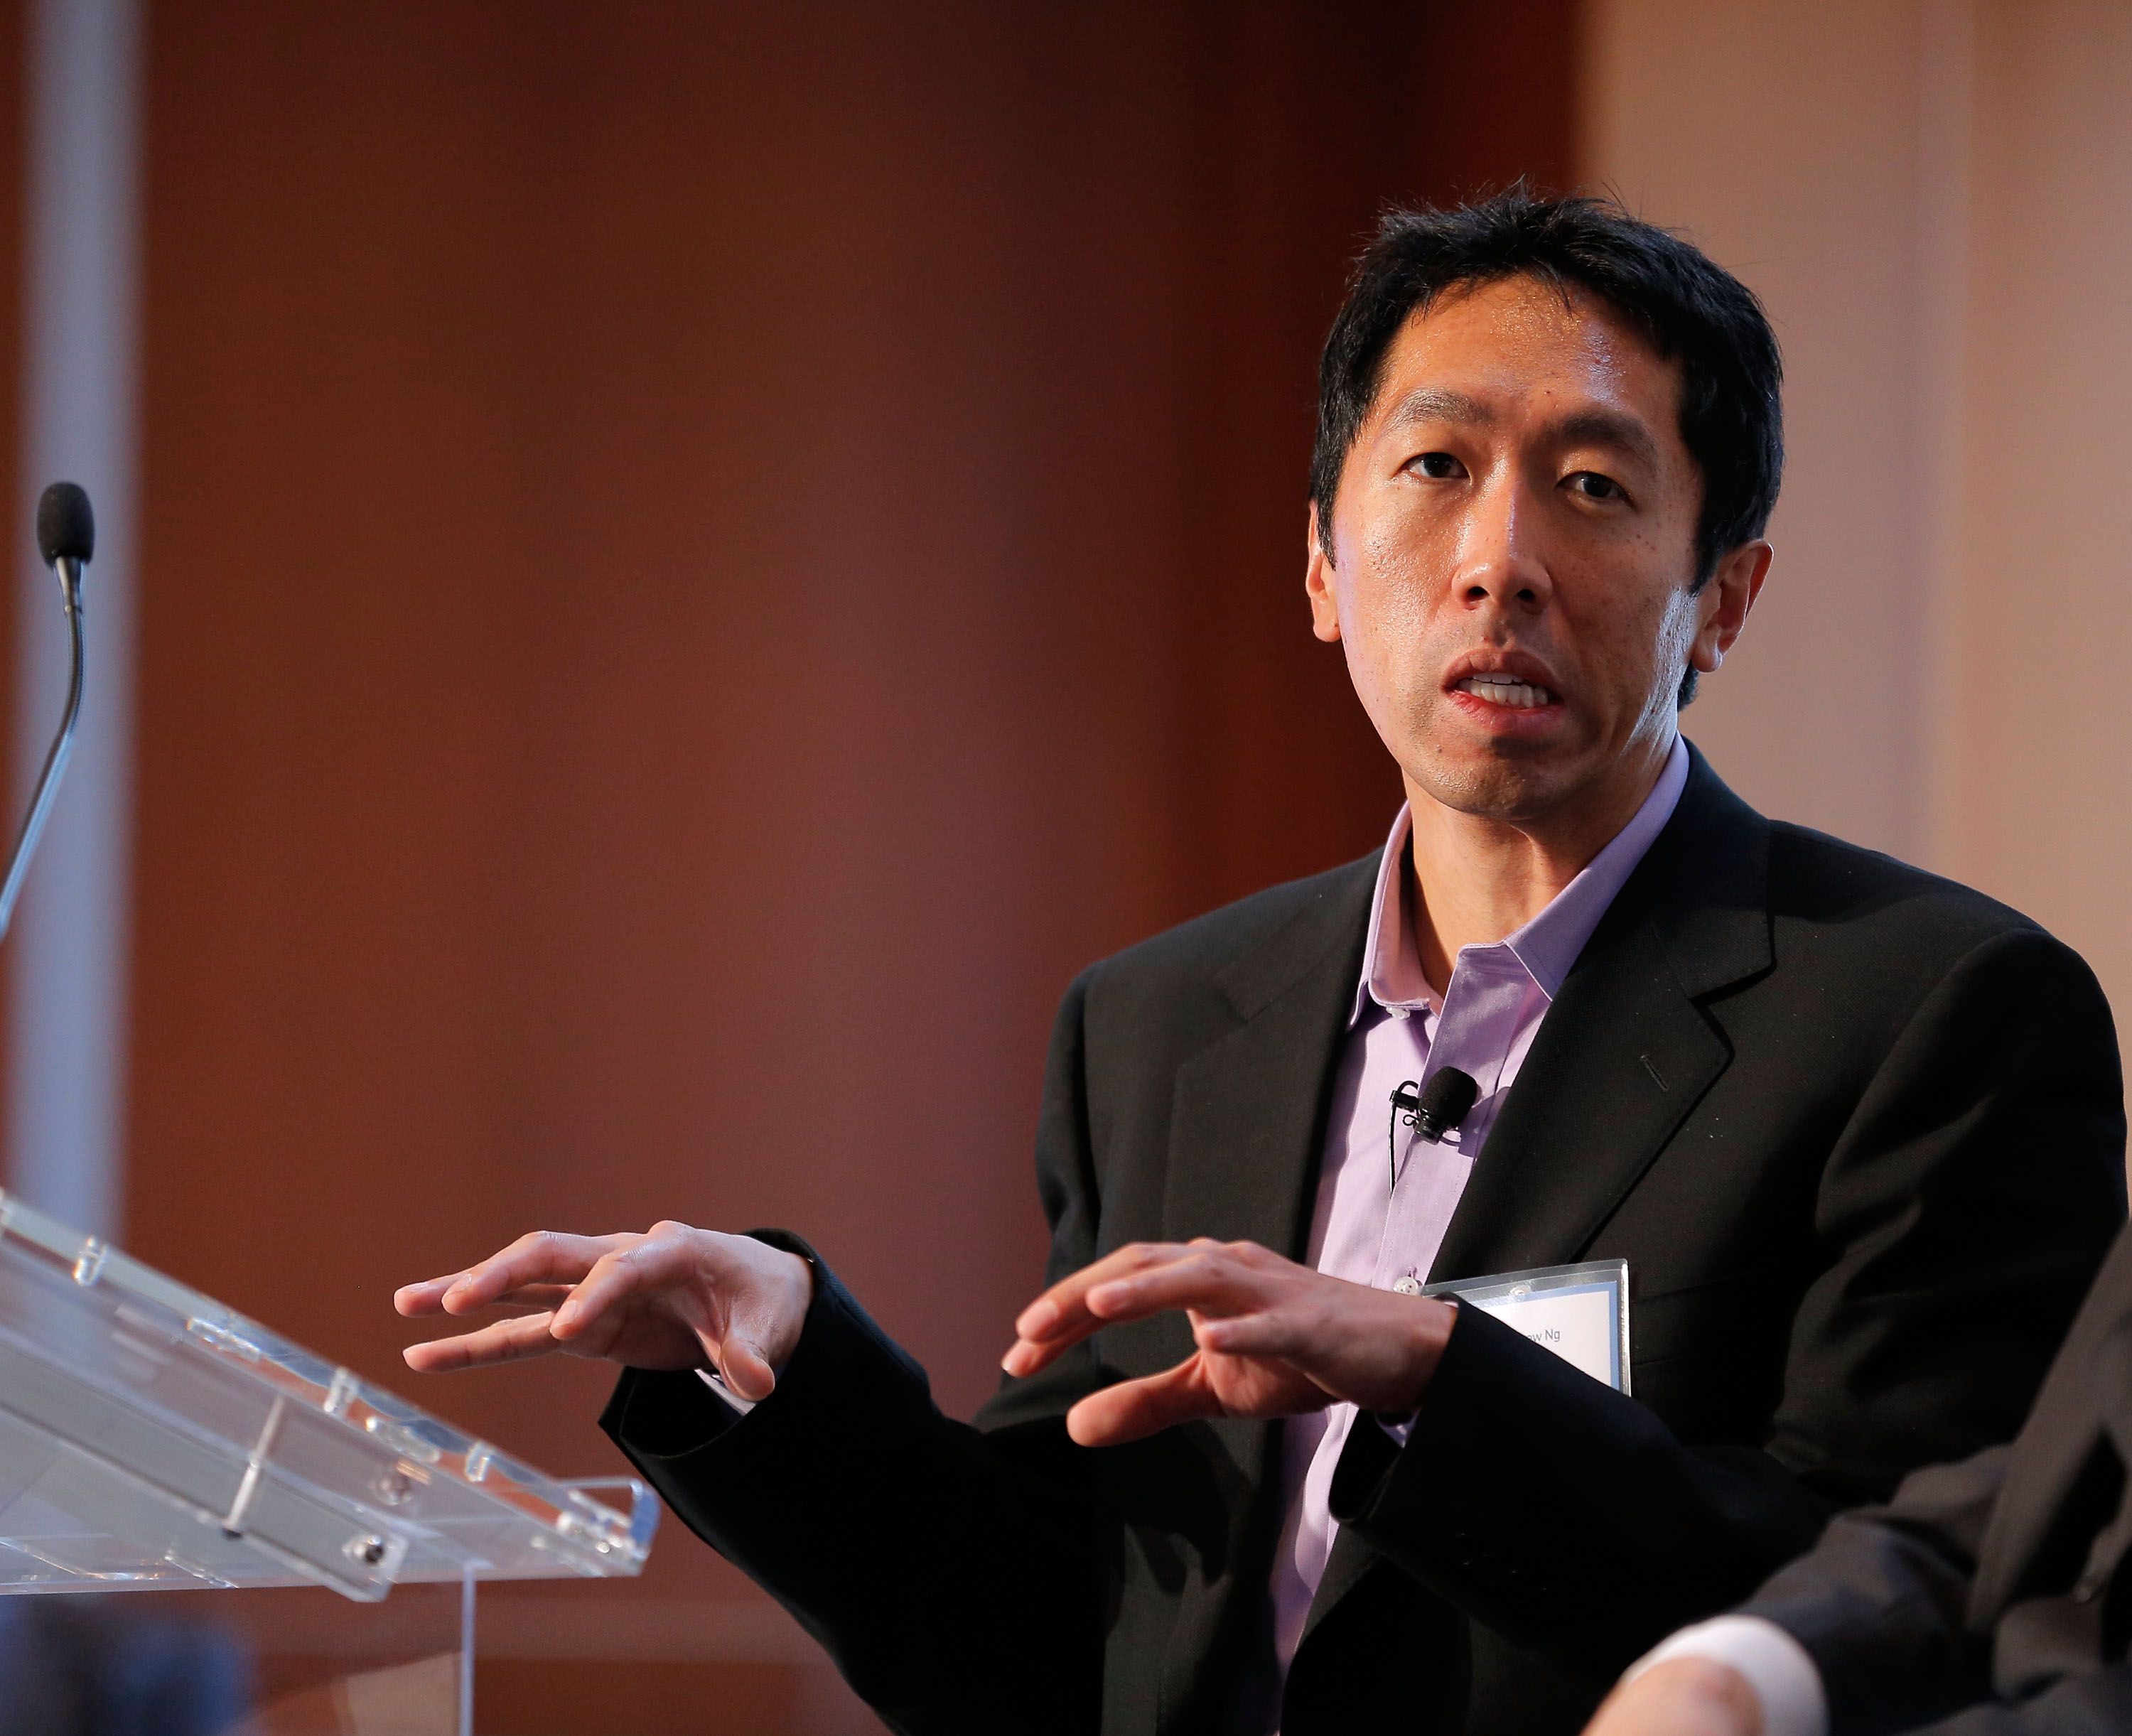 Associate Professor of Computer Science at Stanford University Andrew Ng speaks during the "Changing Landscapes: From the Digital Classroom to the Global Campus" panal during the TIME Summit On Higher Education on October 18, 2012 in New York City. (Jemal Countess&mdash;2012 Getty Images)